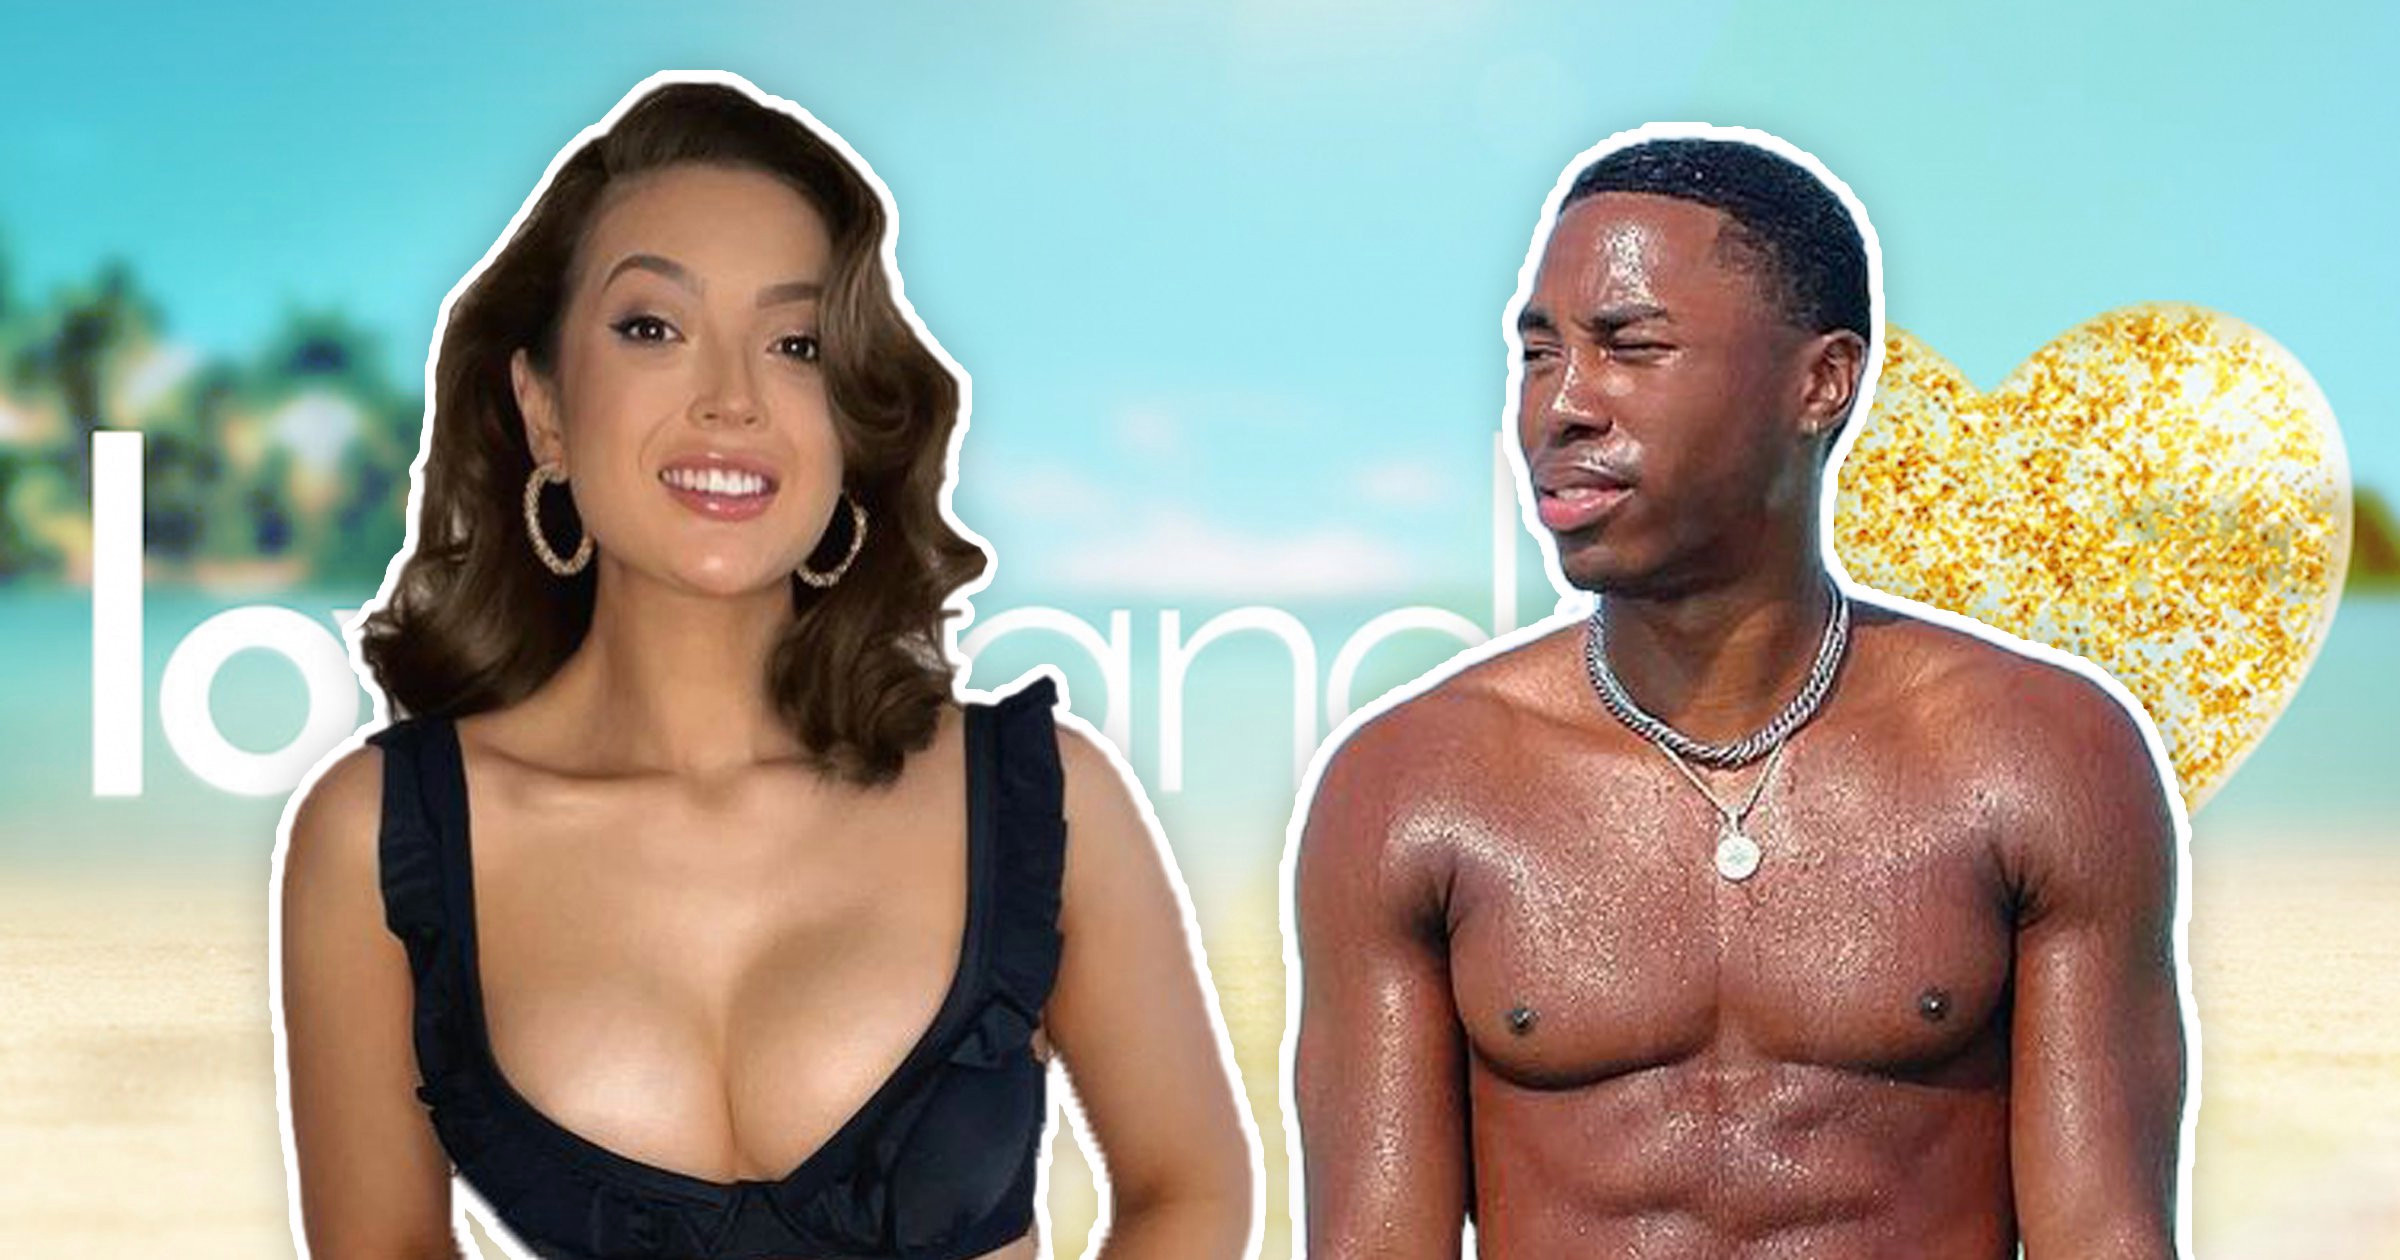 Love Island 2021 ‘confirms’ beauty queen Sharon Gaffka and model Aaron Francis as first official contestants